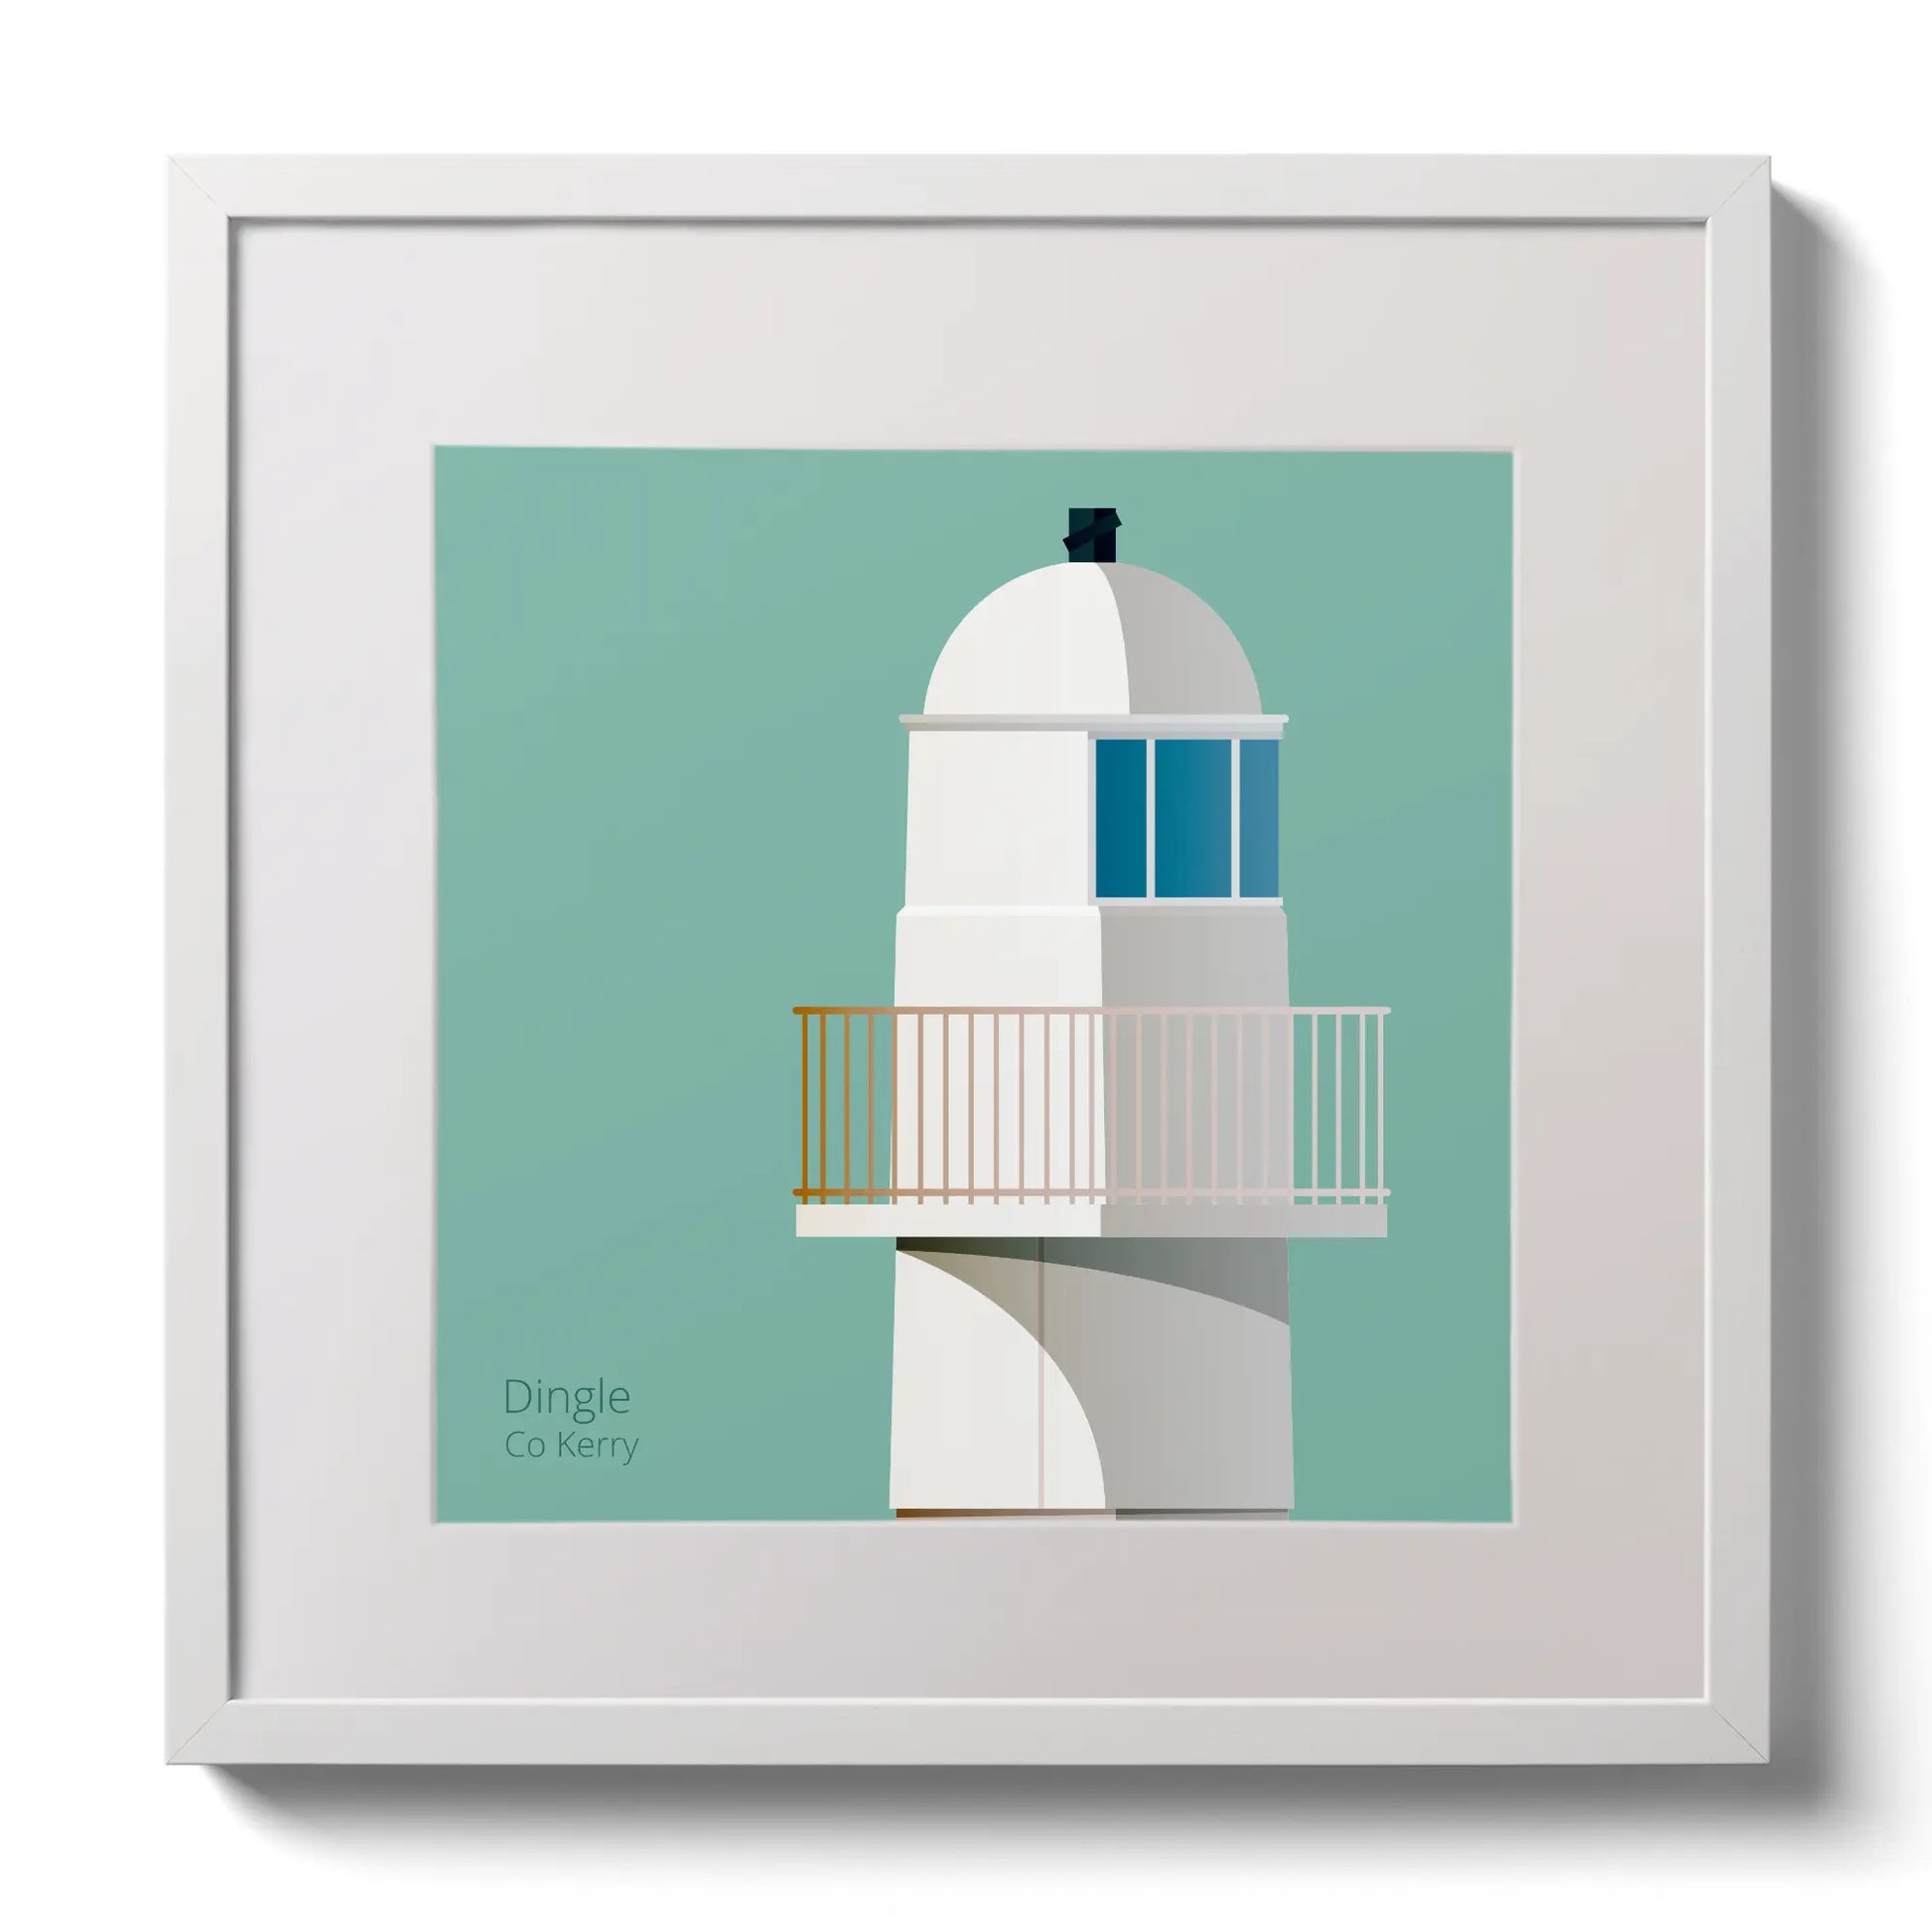 Illustration of Dingle lighthouse on an ocean green background,  in a white square frame measuring 30x30cm.